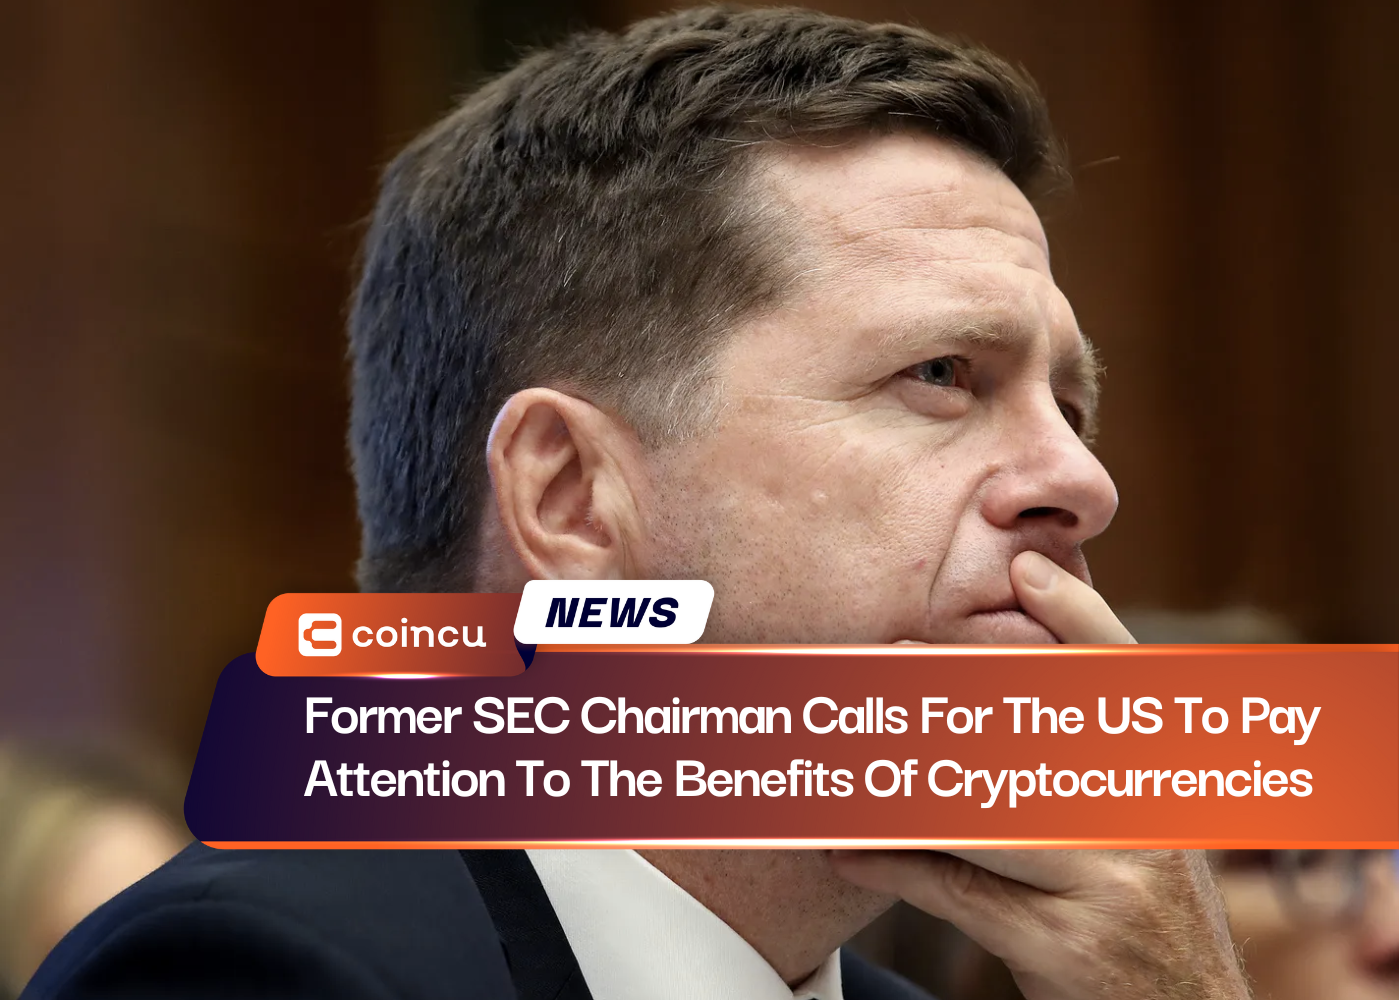 Former SEC Chairman Calls For The US To Pay Attention To The Benefits Of Cryptocurrencies